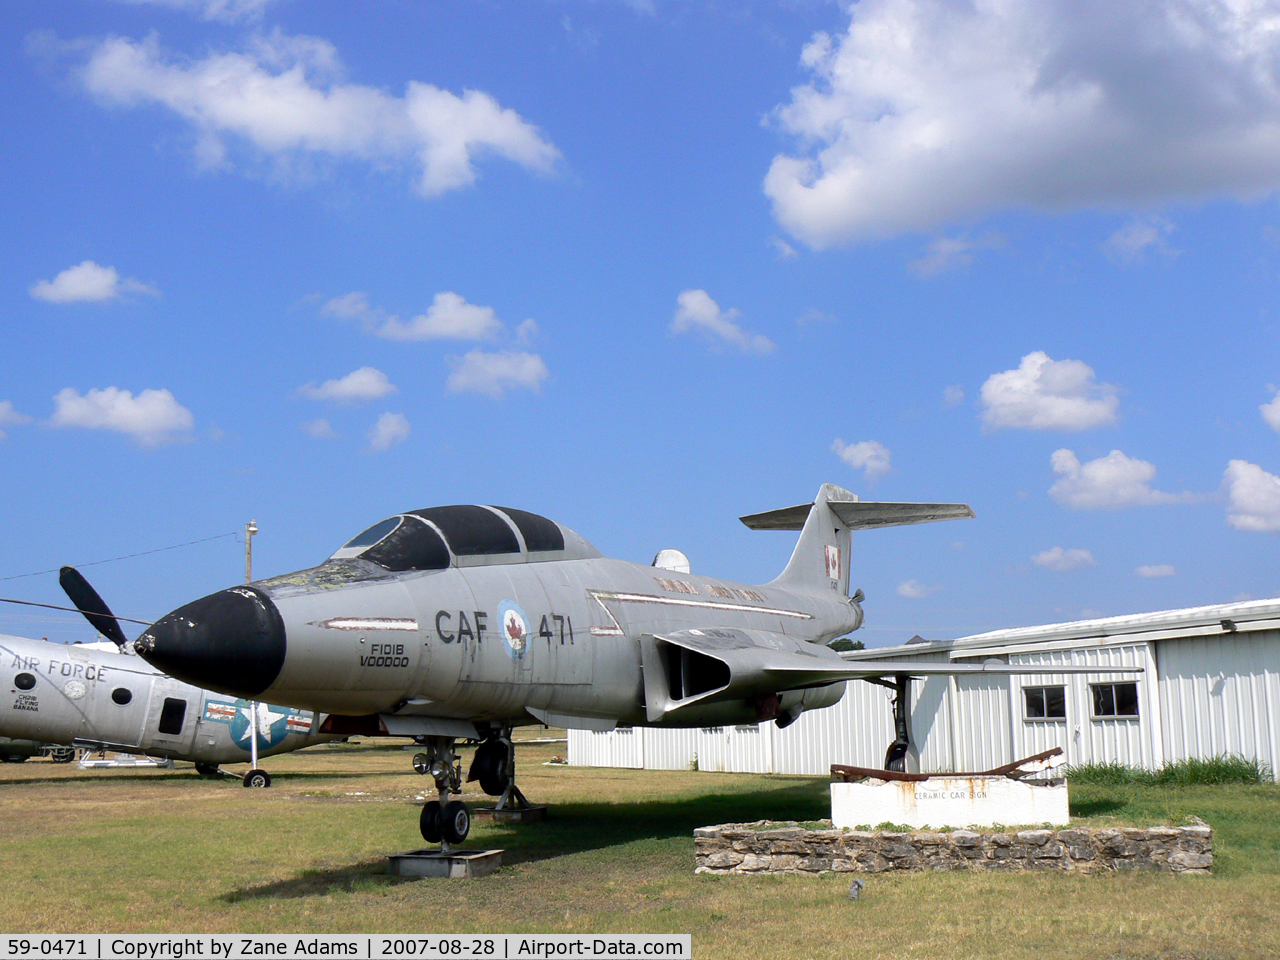 59-0471, McDonnell F-101B Voodoo C/N 795, At the Pate Museum of Transportation near Cresson, TX